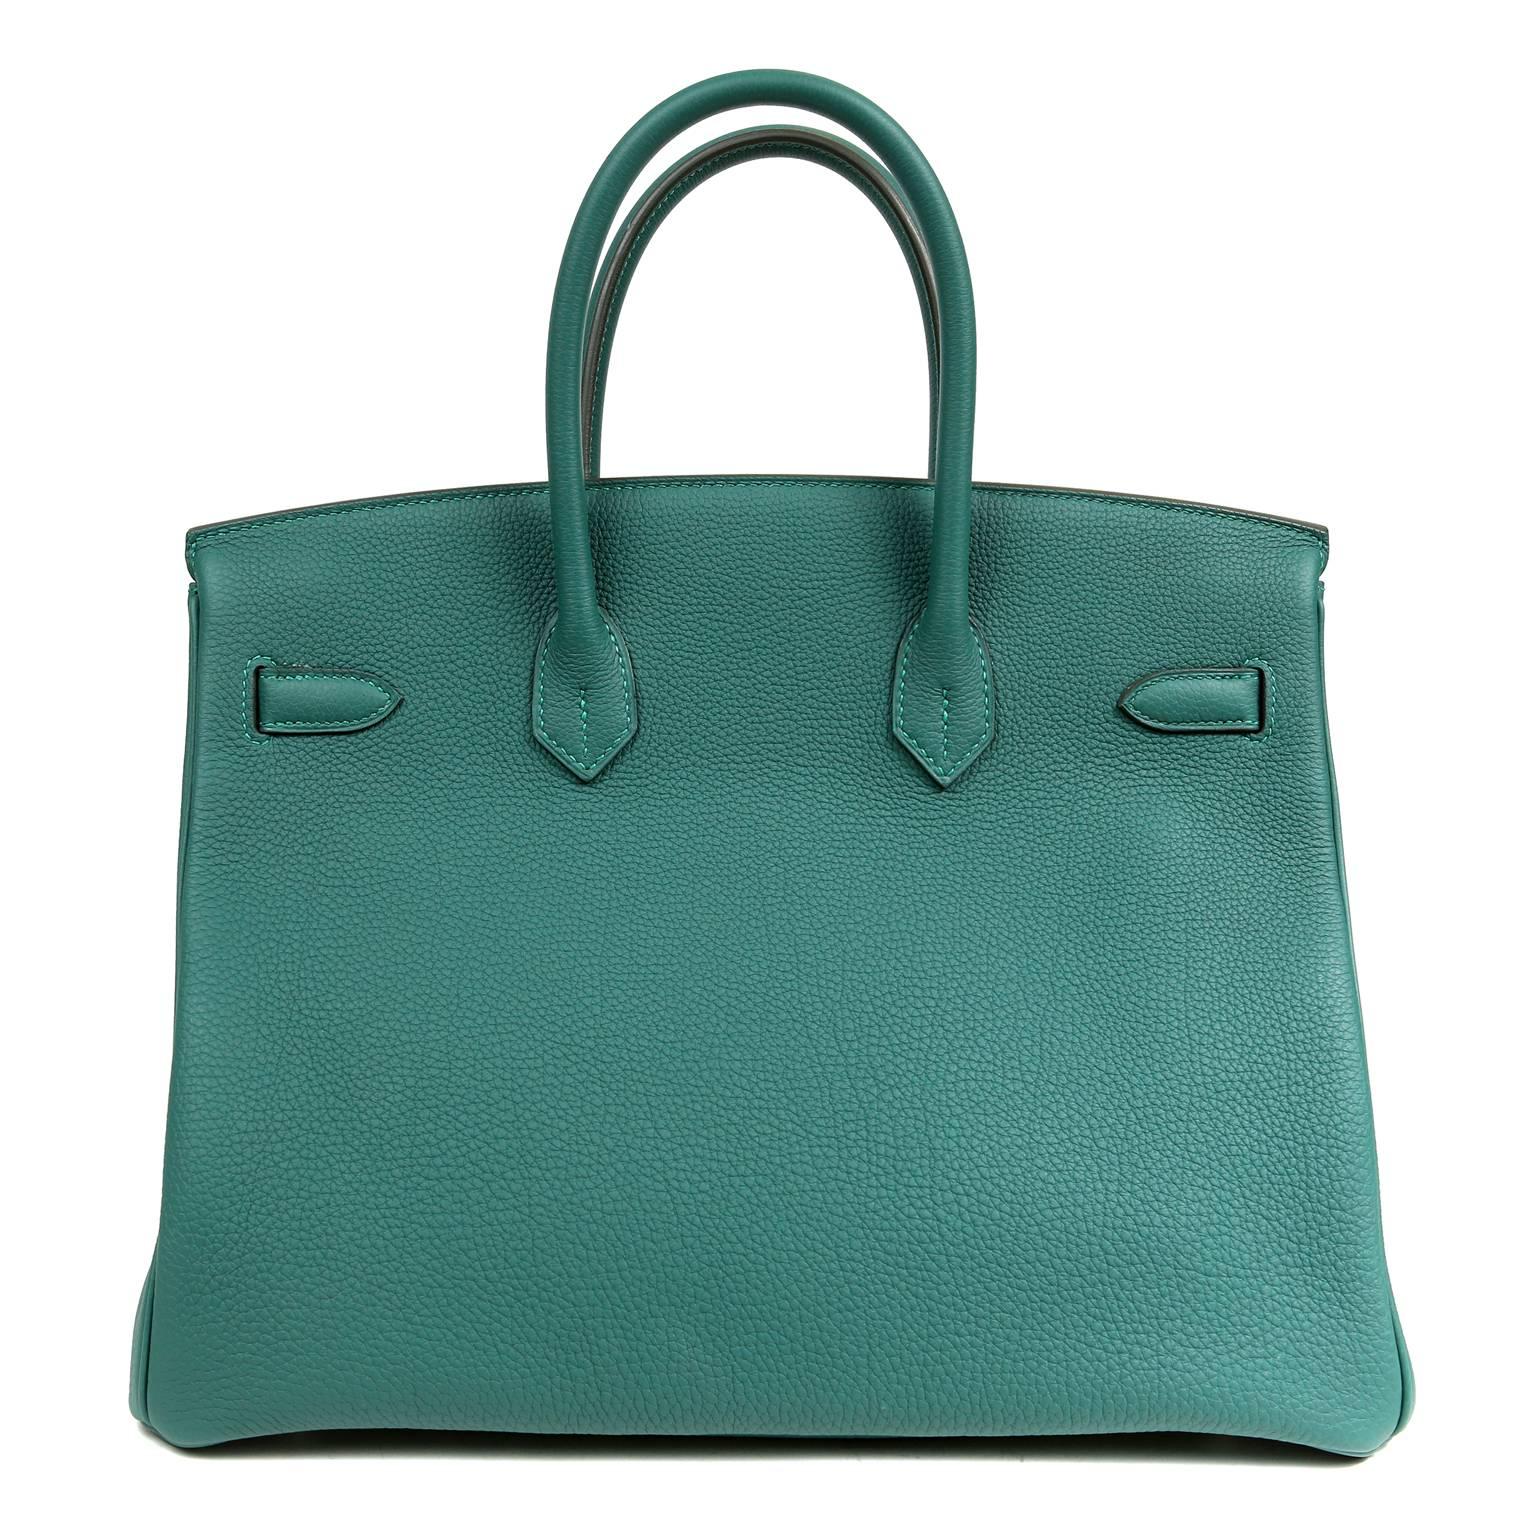 Hermès Malachite Togo 35 cm Birkin Bag- PRISTINE;Never Carried
 The plastic is intact on all hardware.

Waitlists exceeding a year are commonplace for the intensely coveted Birkin. Each piece is hand crafted by skilled artisans and represents the